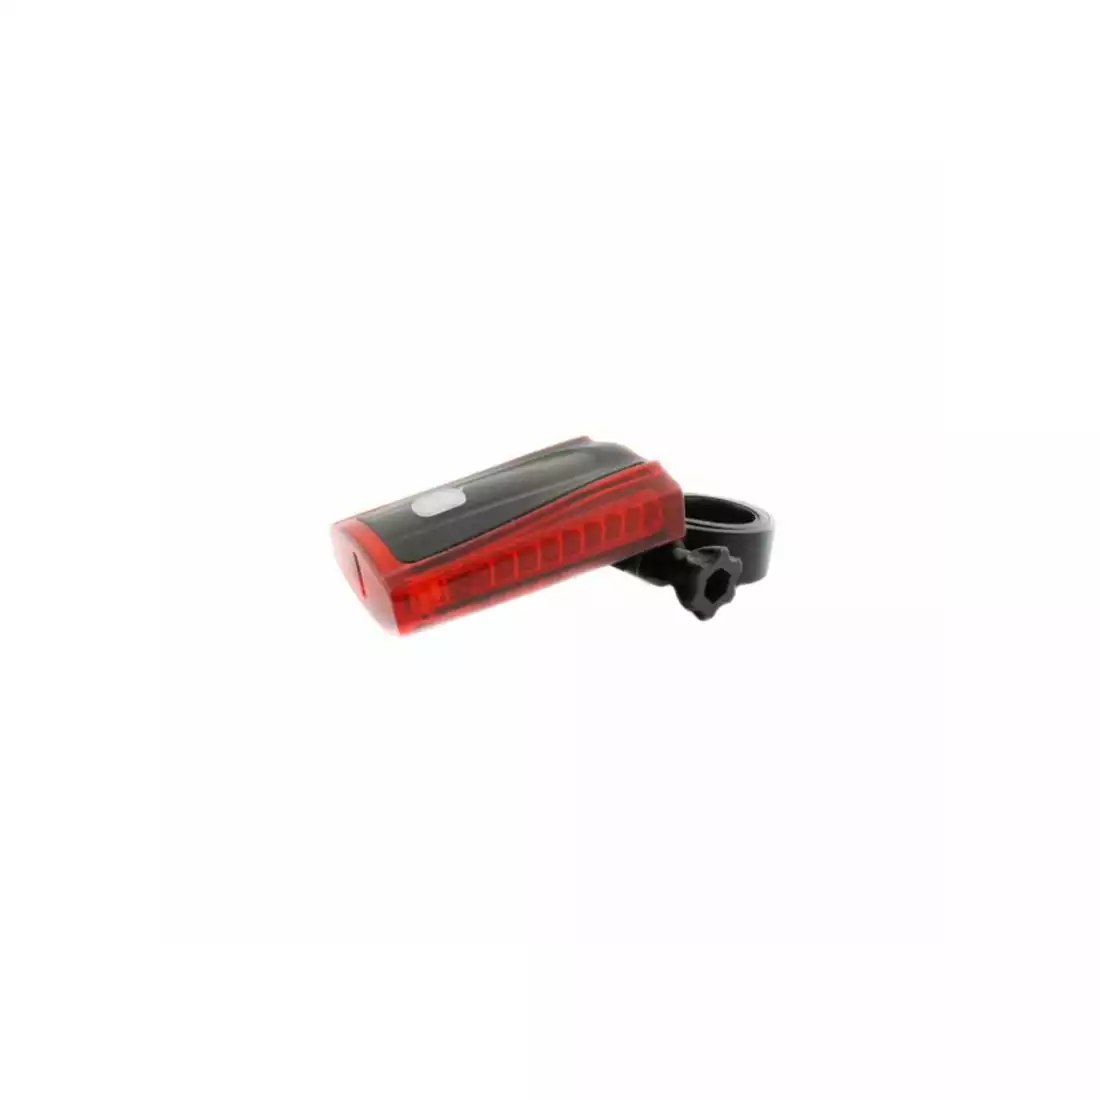 Rear bicycle lamp, LED 360 degrees